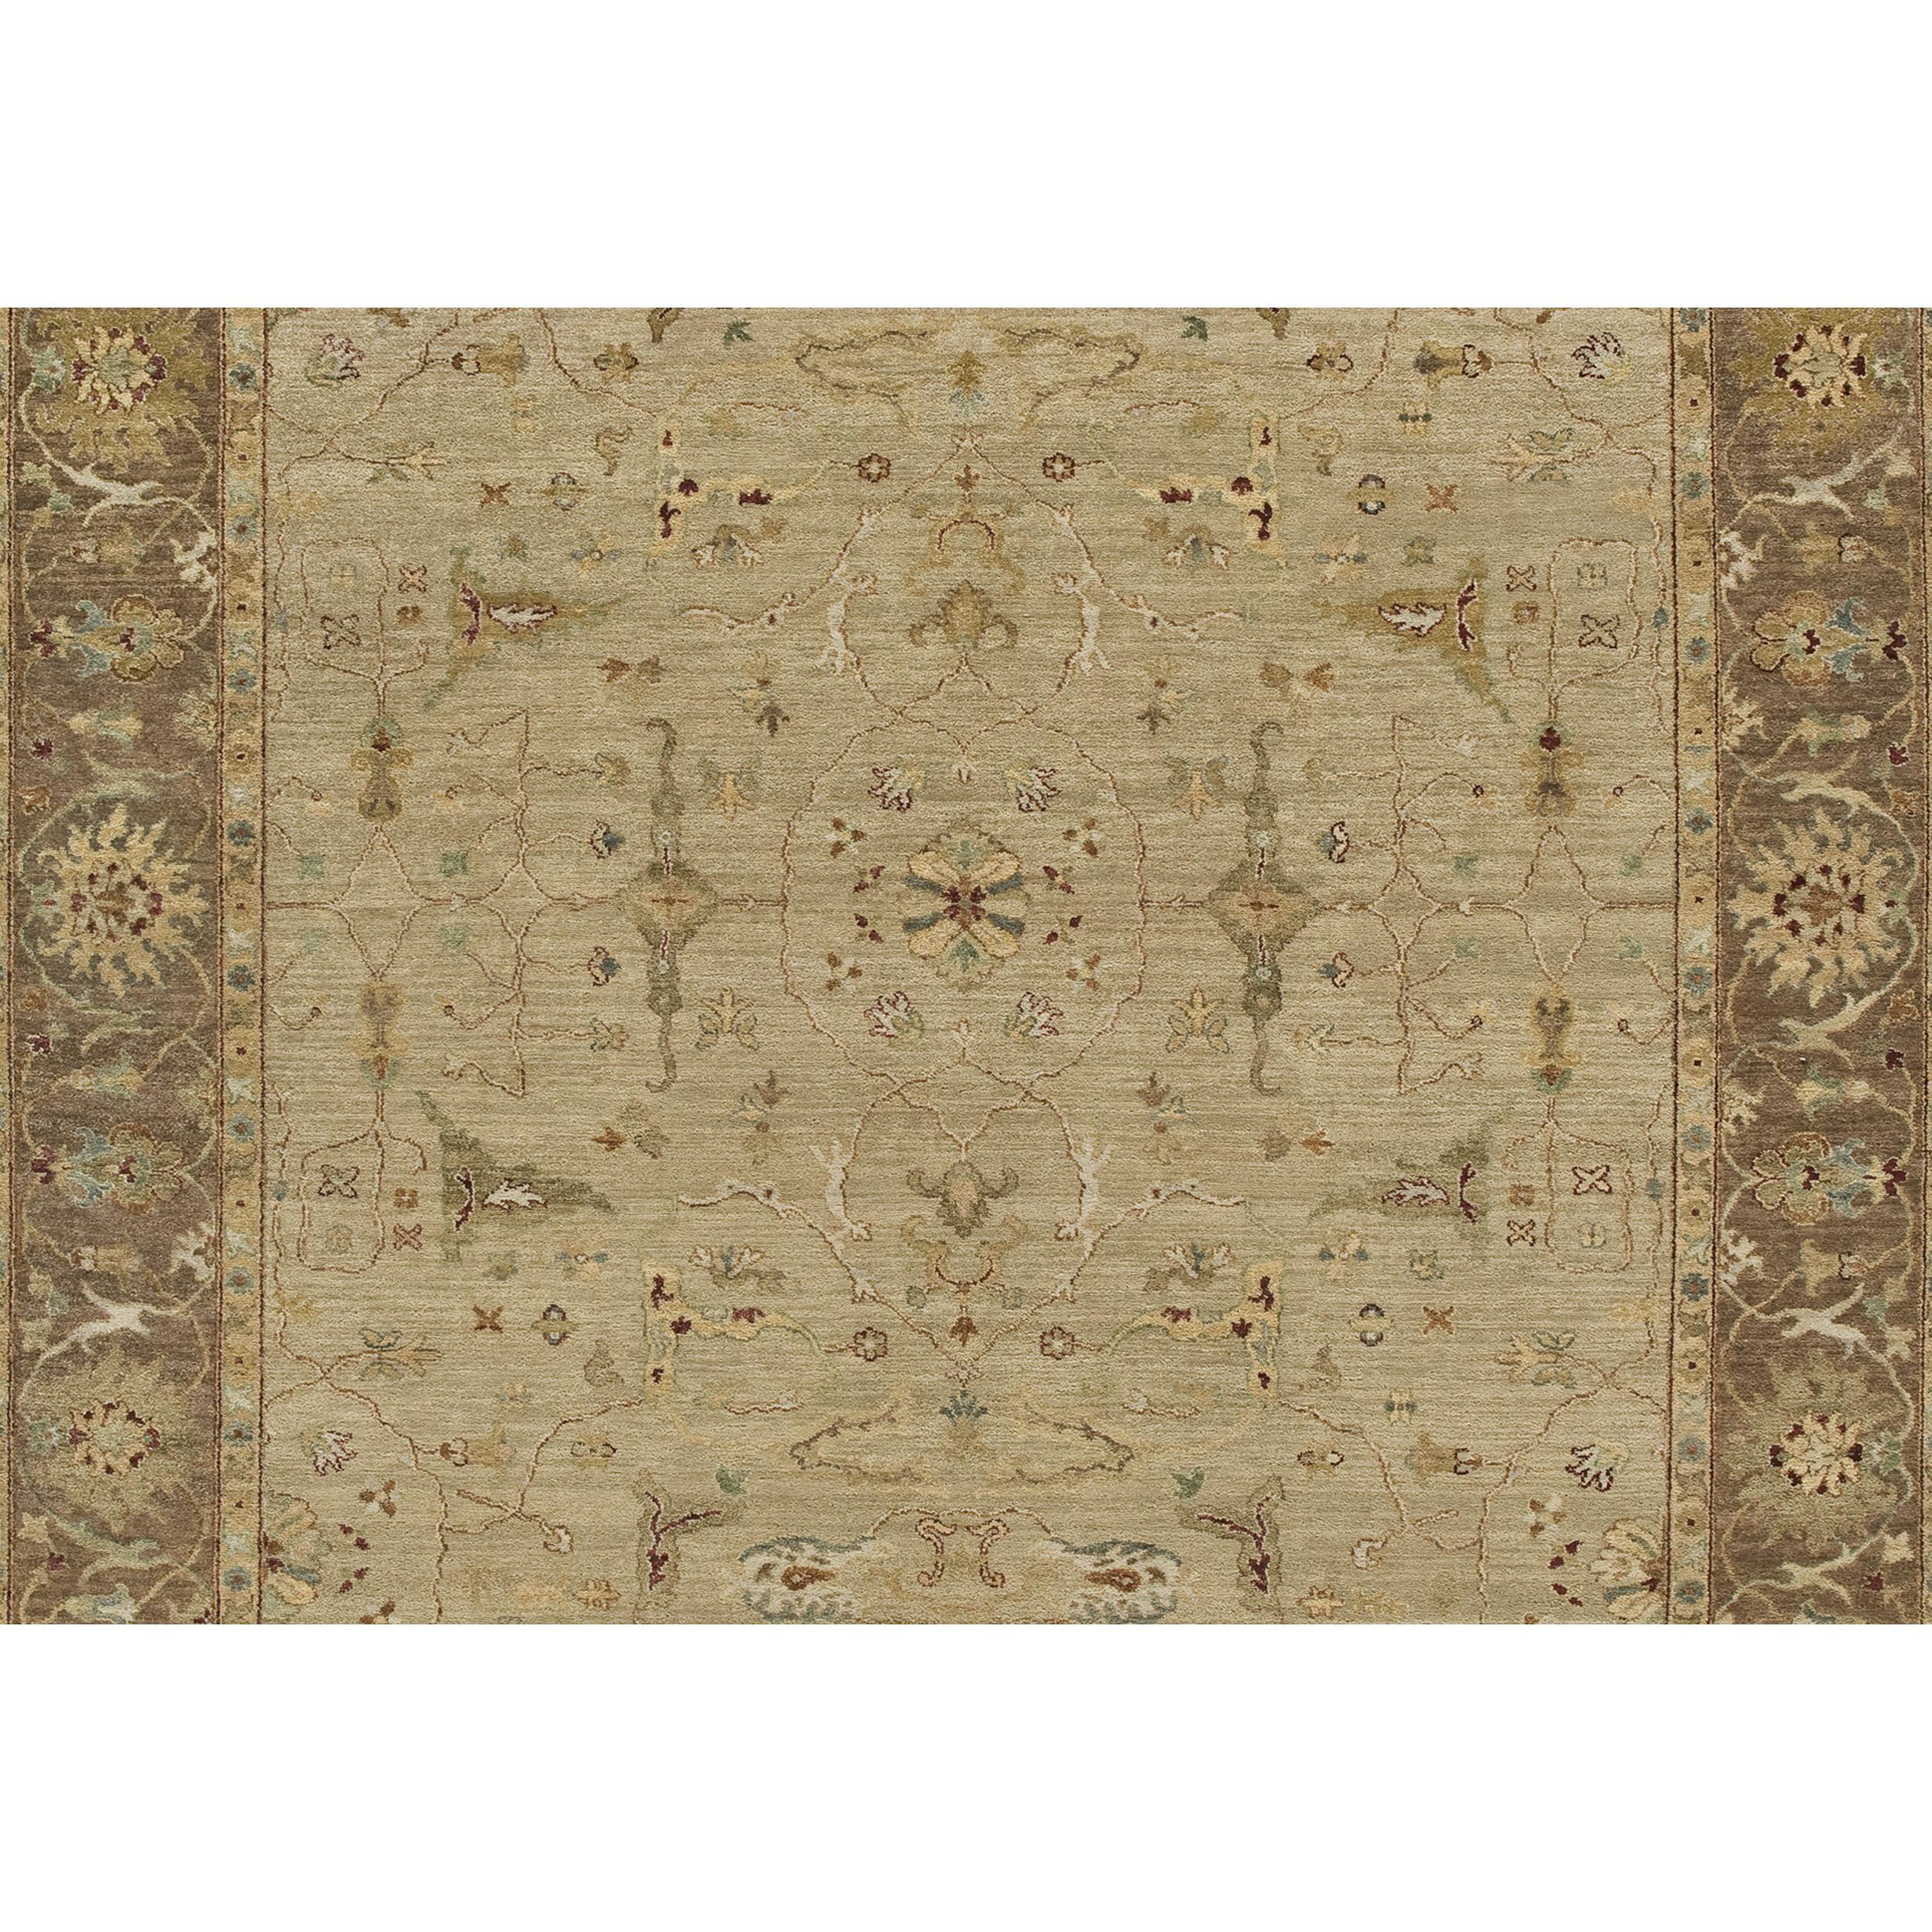 Indian Luxury Traditional Hand-Knotted Beige/Chestnut 12x24 Rug For Sale